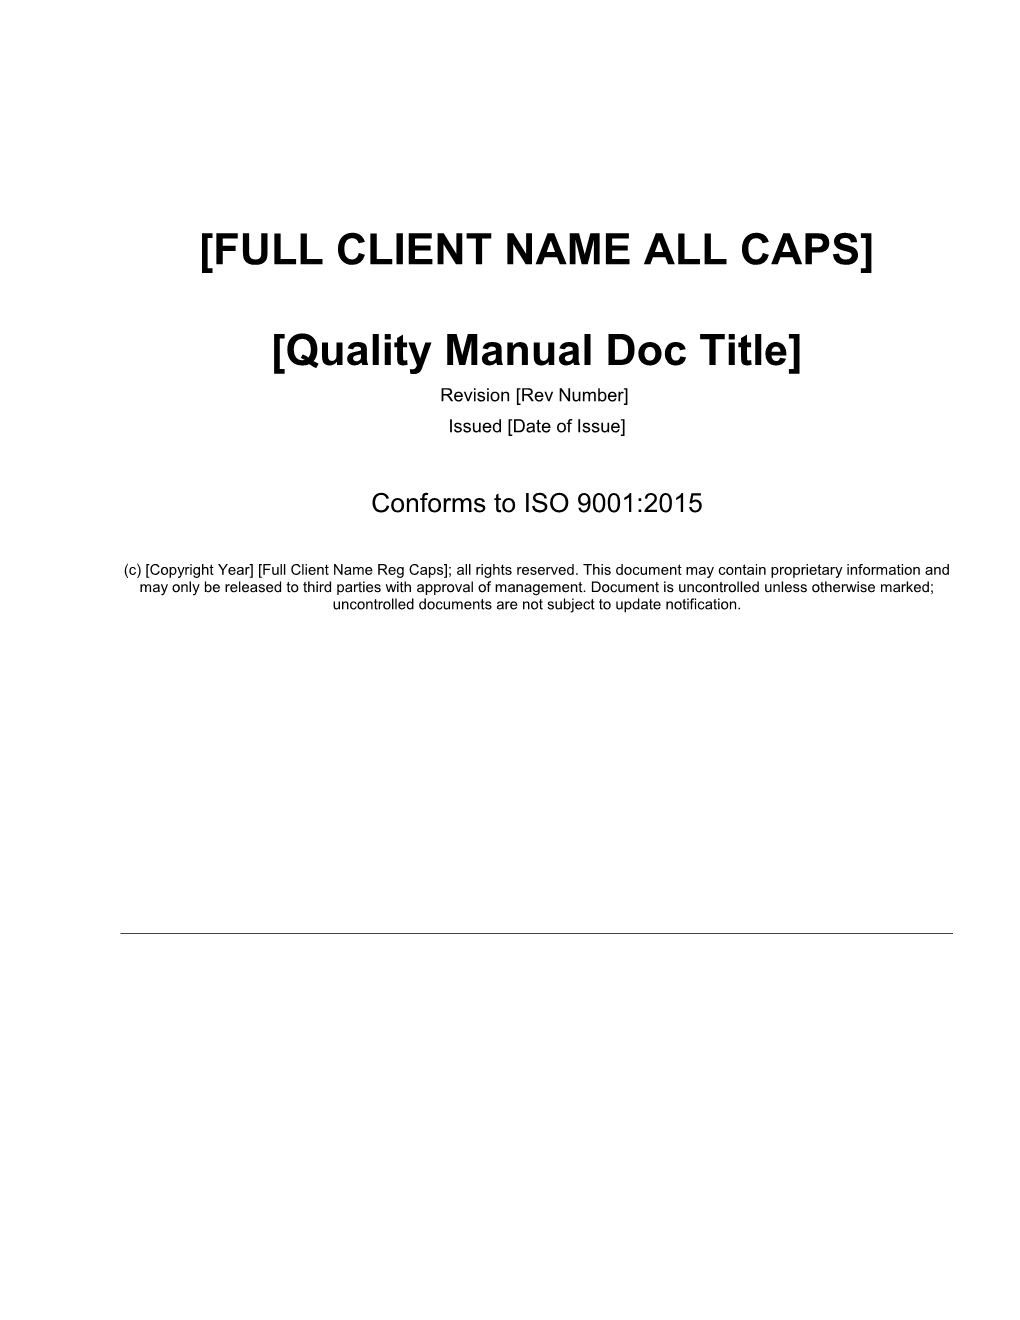 Oxebridge Totally Free ISO 9001 QMS Template Kit s2